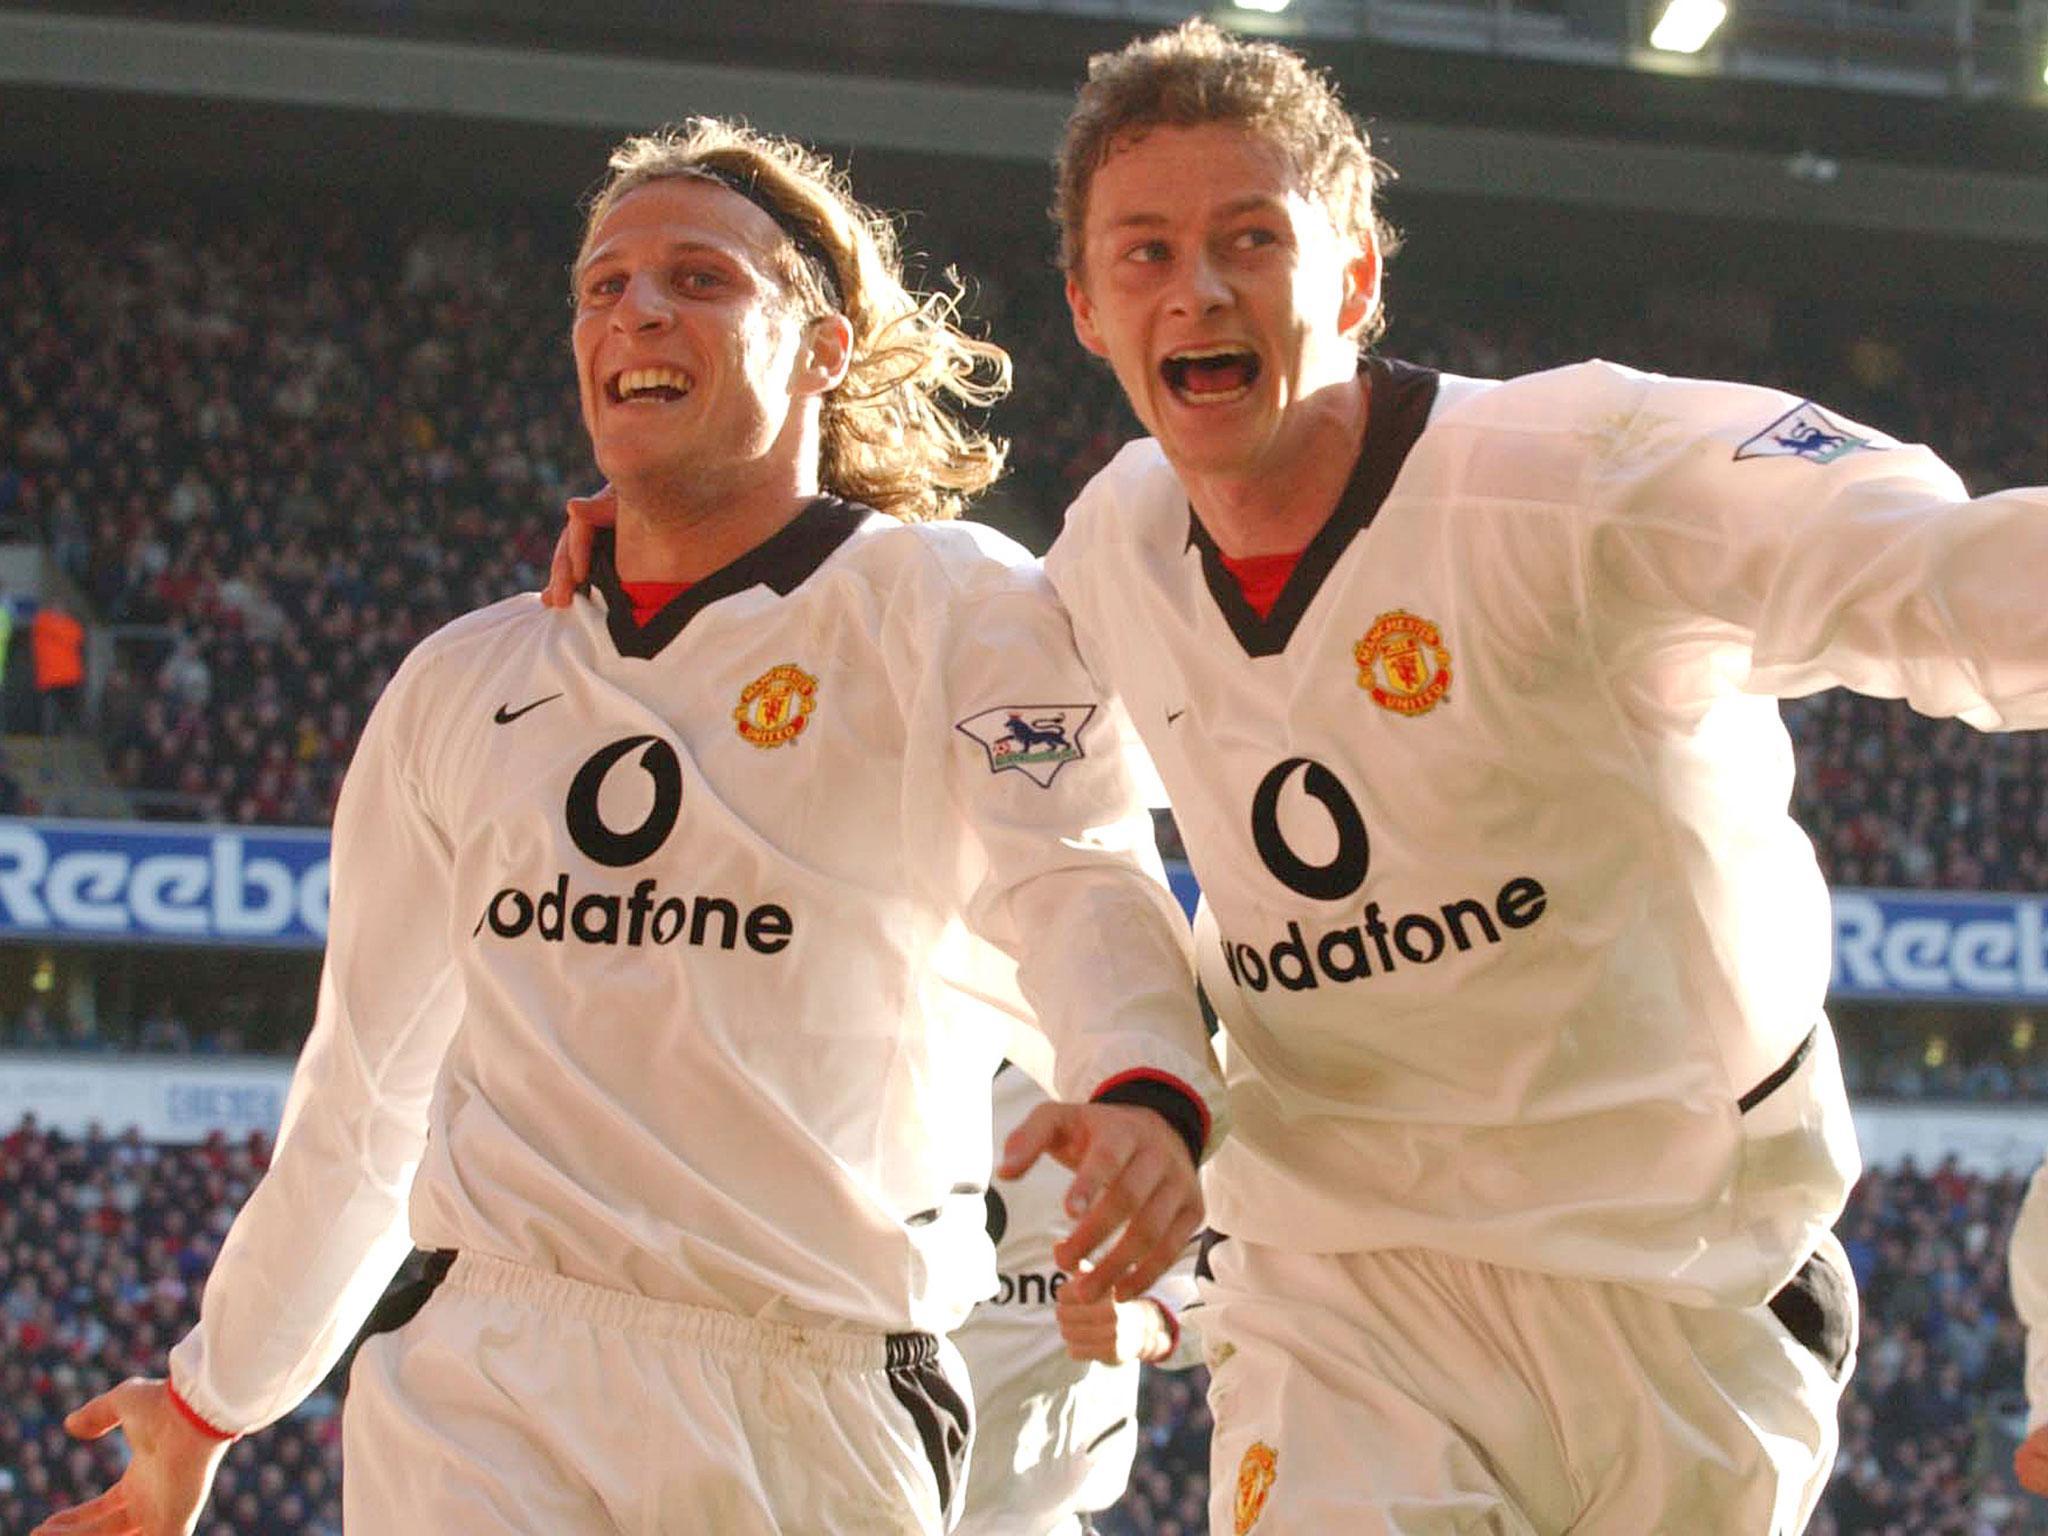 Liverpool and Manchester United have played out some classics - but not for a long time